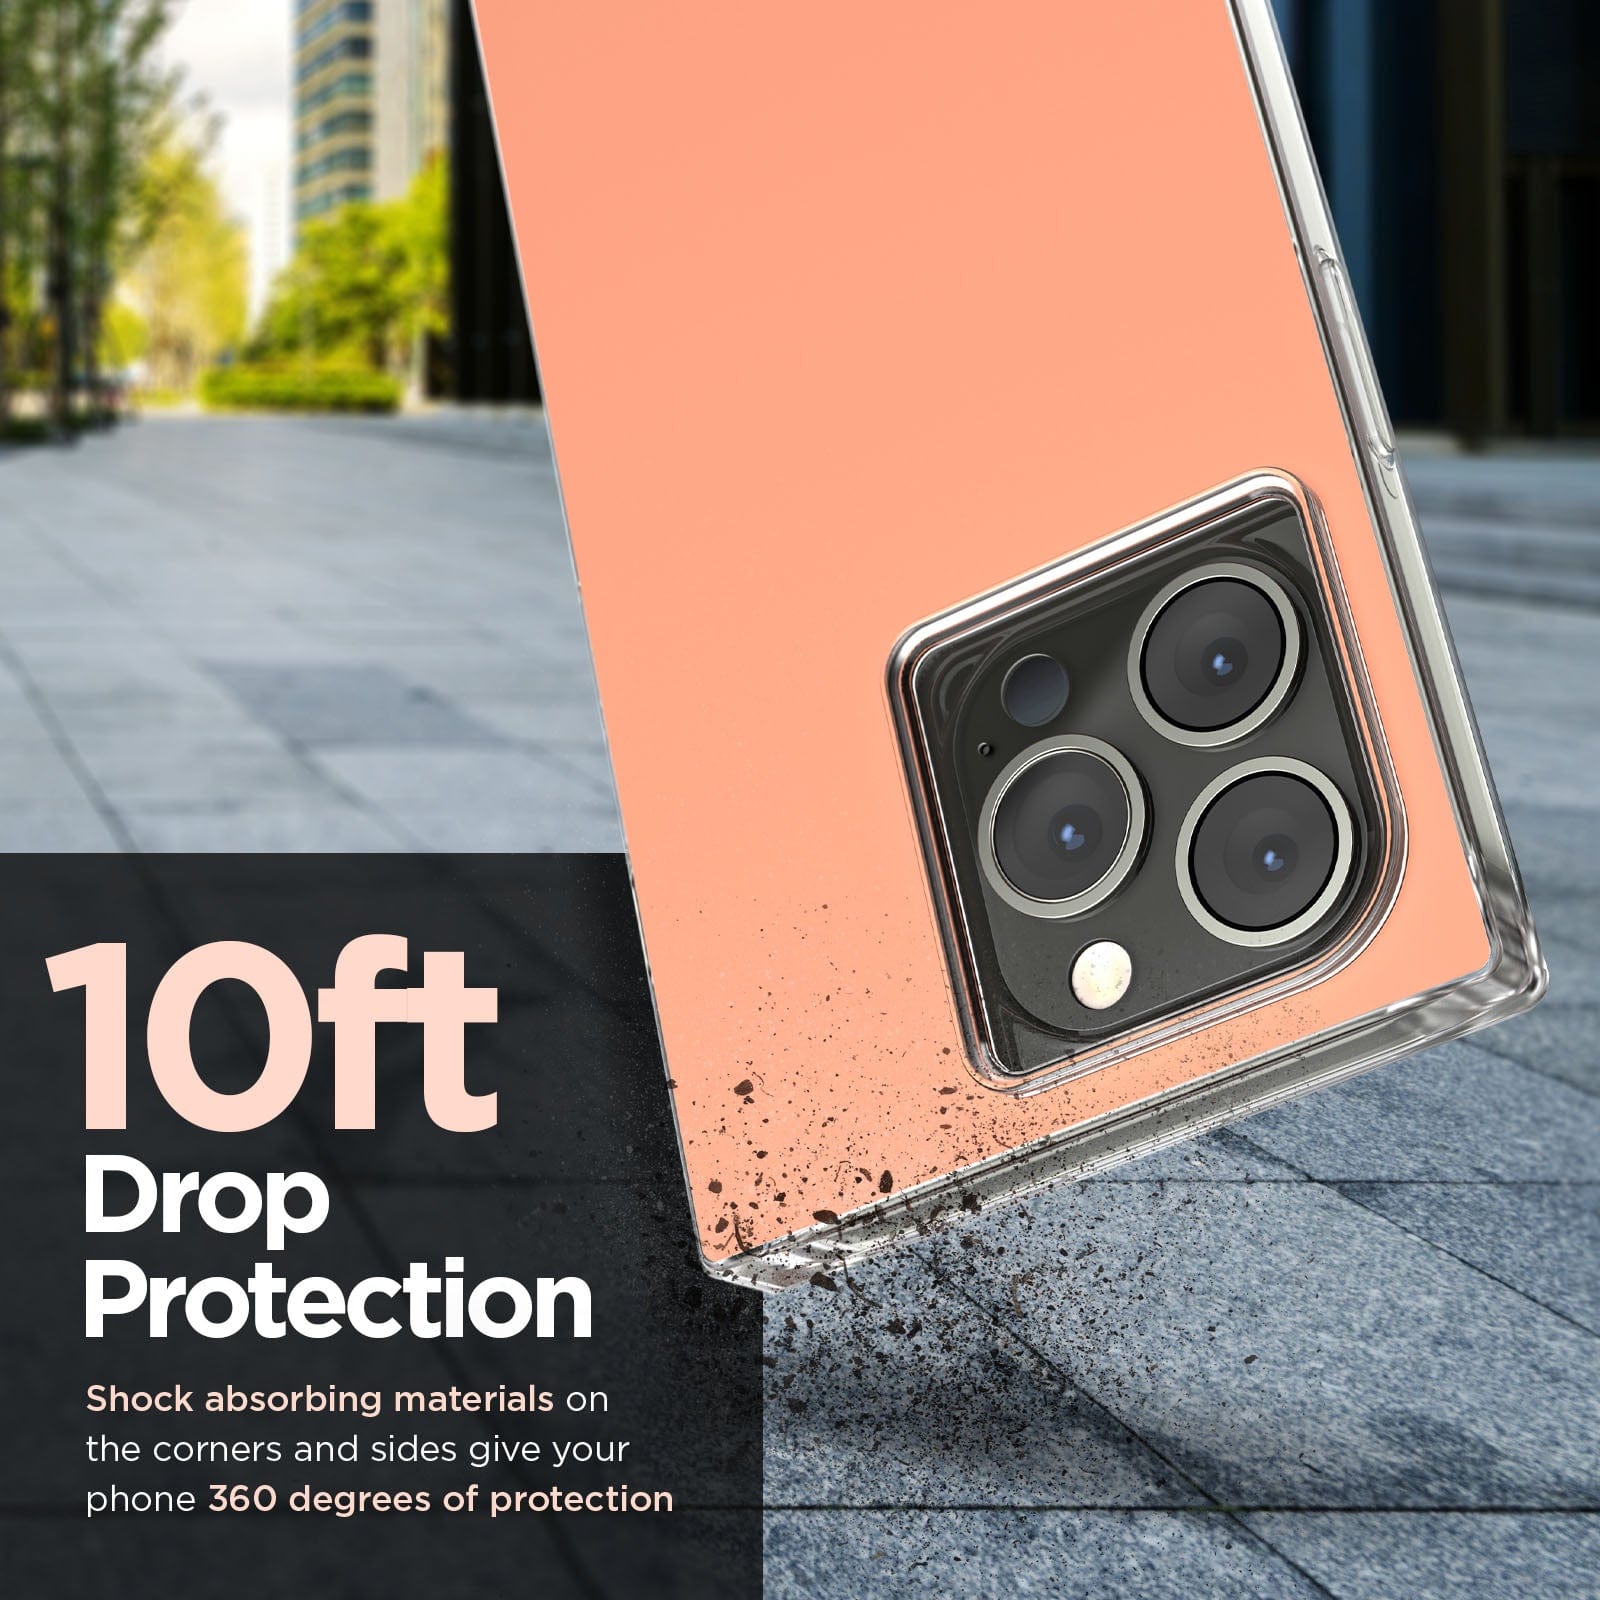 10ft drop protection. Shock absorbing materials on the corners and sides give your phone 360 degrees of protection. color::Clay Pink